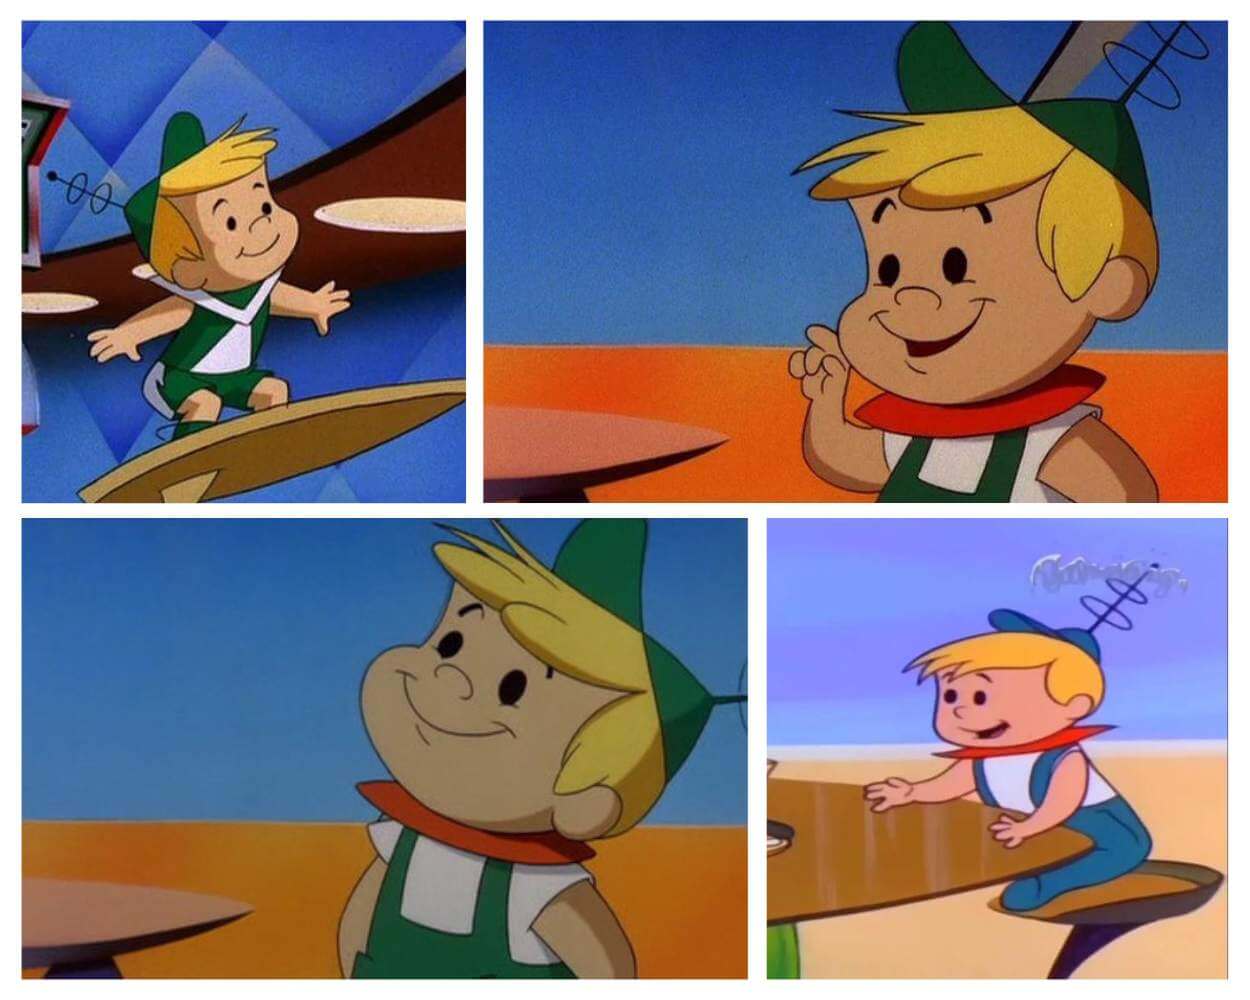 Elroy Jetsons from the classic TV show The Jetsons